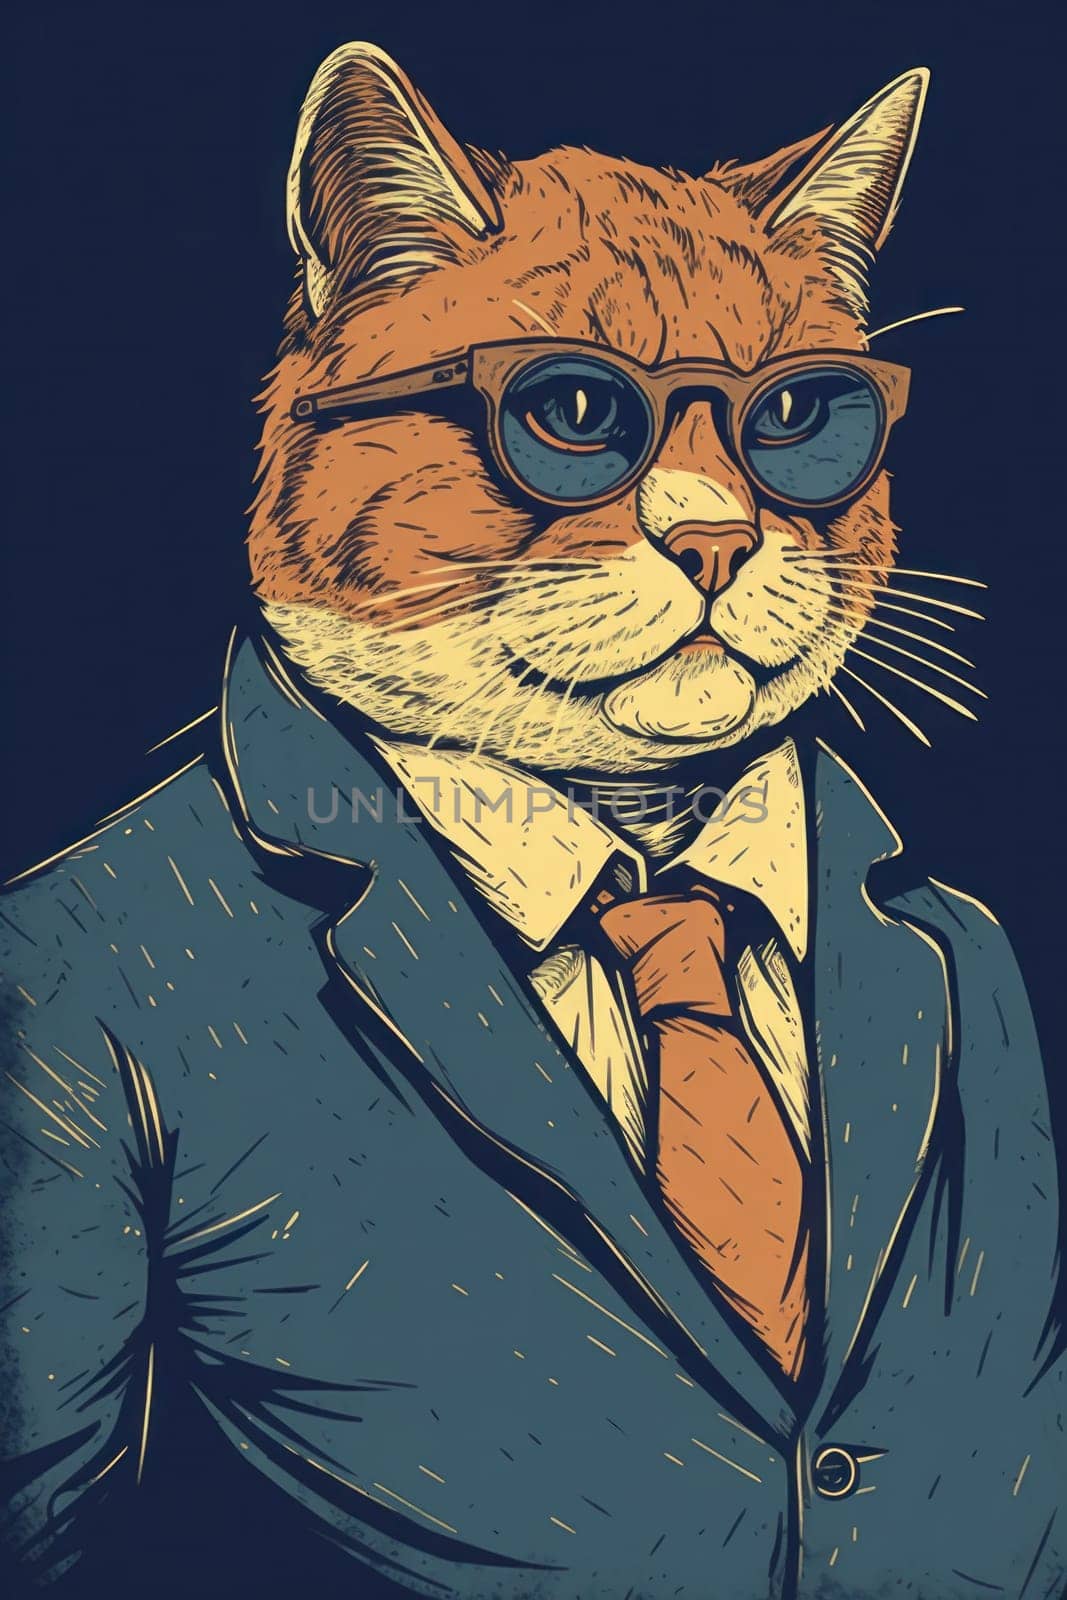 A cat in a suit and tie wearing glasses